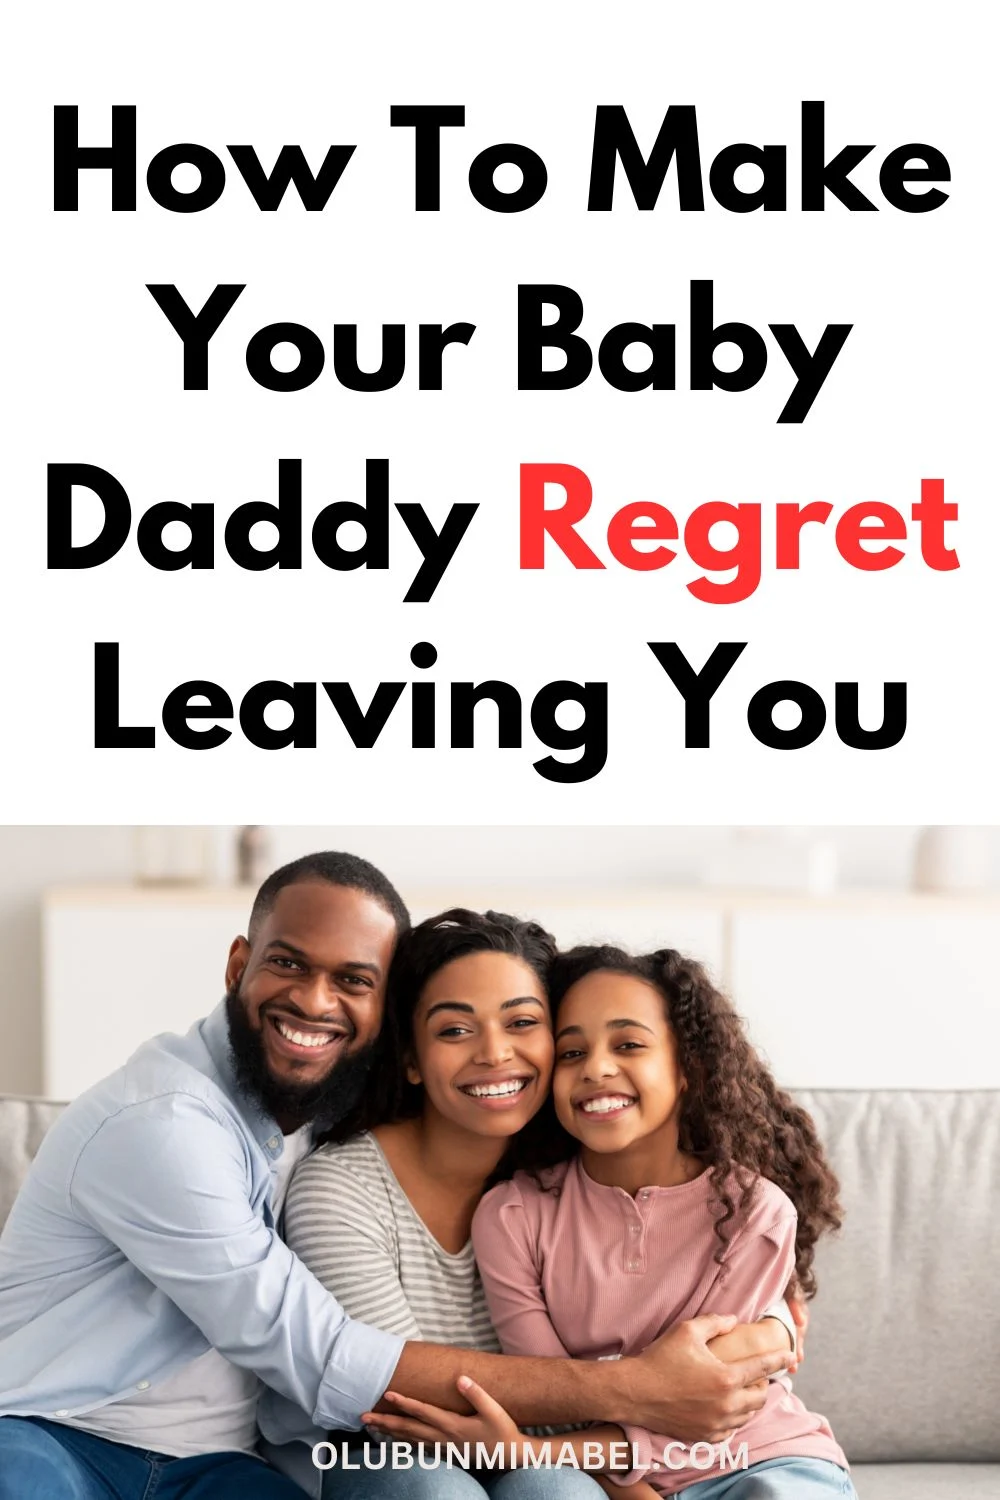 How To Make Your Baby Daddy Regret Leaving You